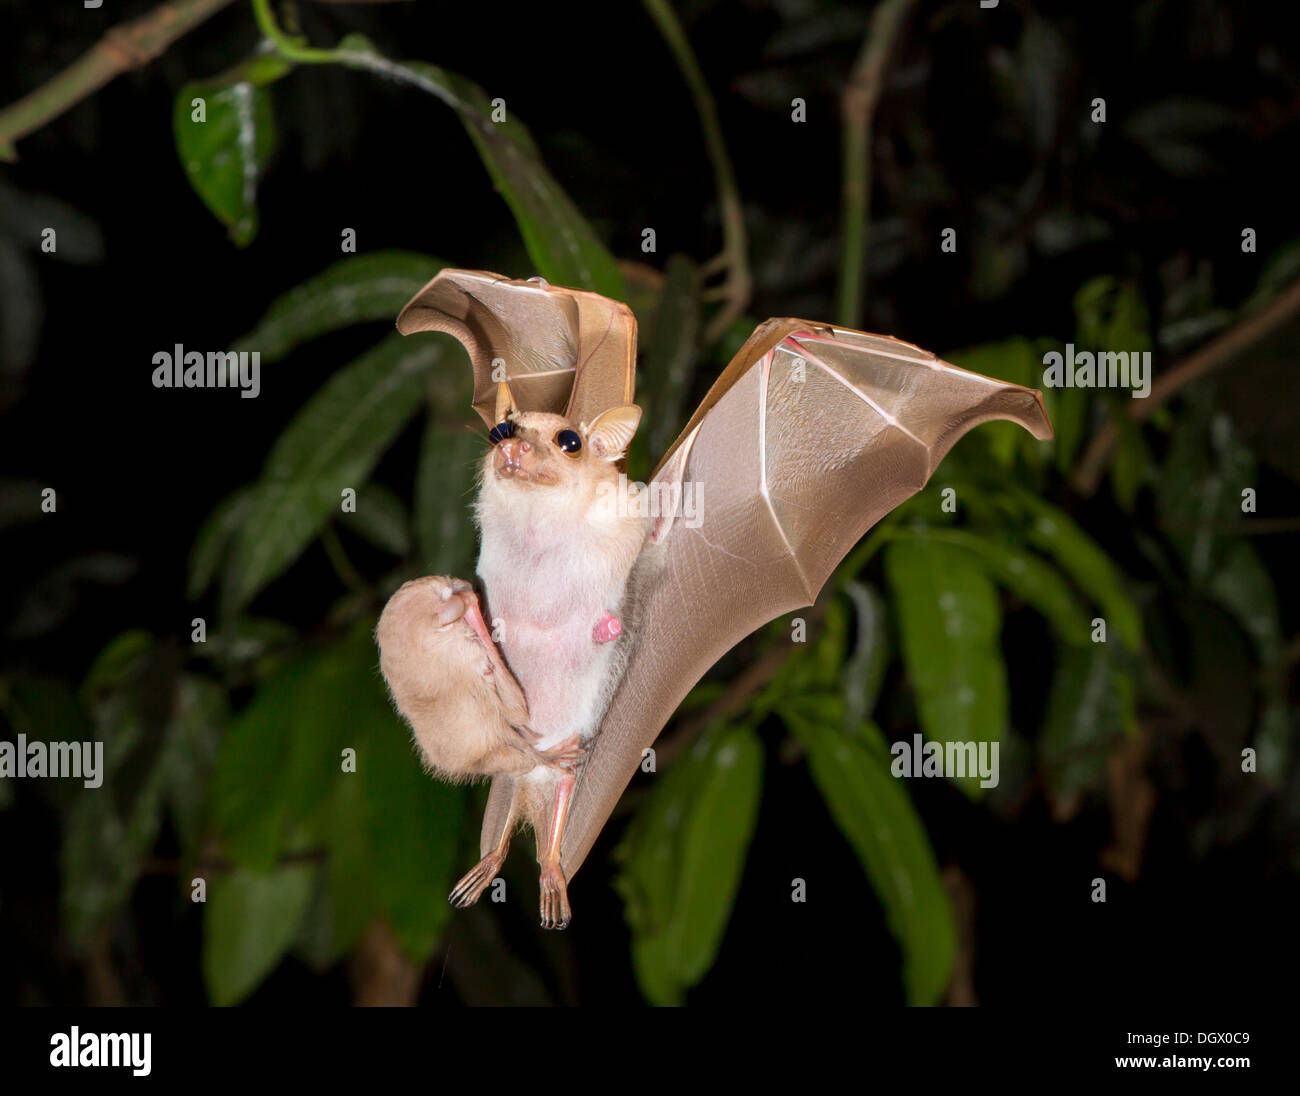 Female Peter's dwarf epauletted fruit bat (Micropteropus pussilus) flying with a baby on her belly, Ghana. Stock Photo